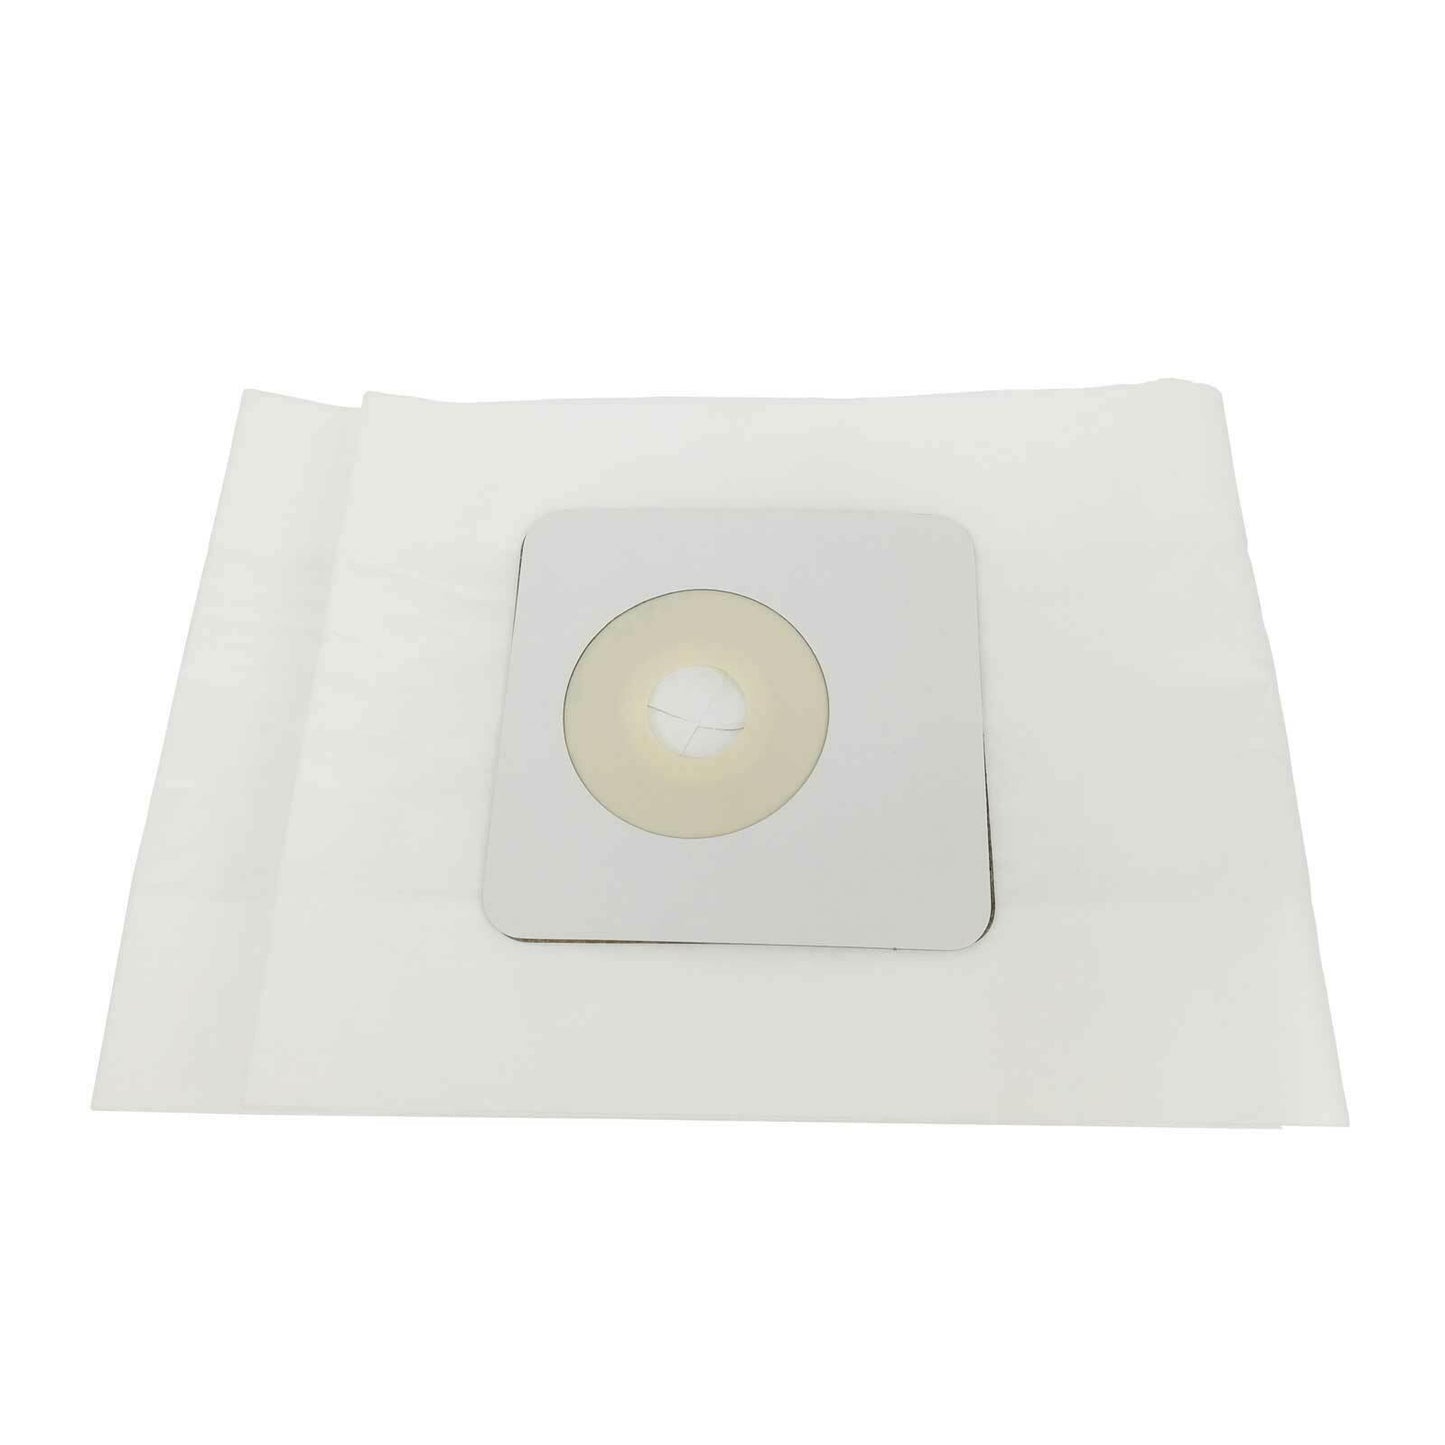 8X Ducted Vacuum Cleaner Bags For Astrovac VV100L DV1200B AS3000L DL1400B Sparesbarn